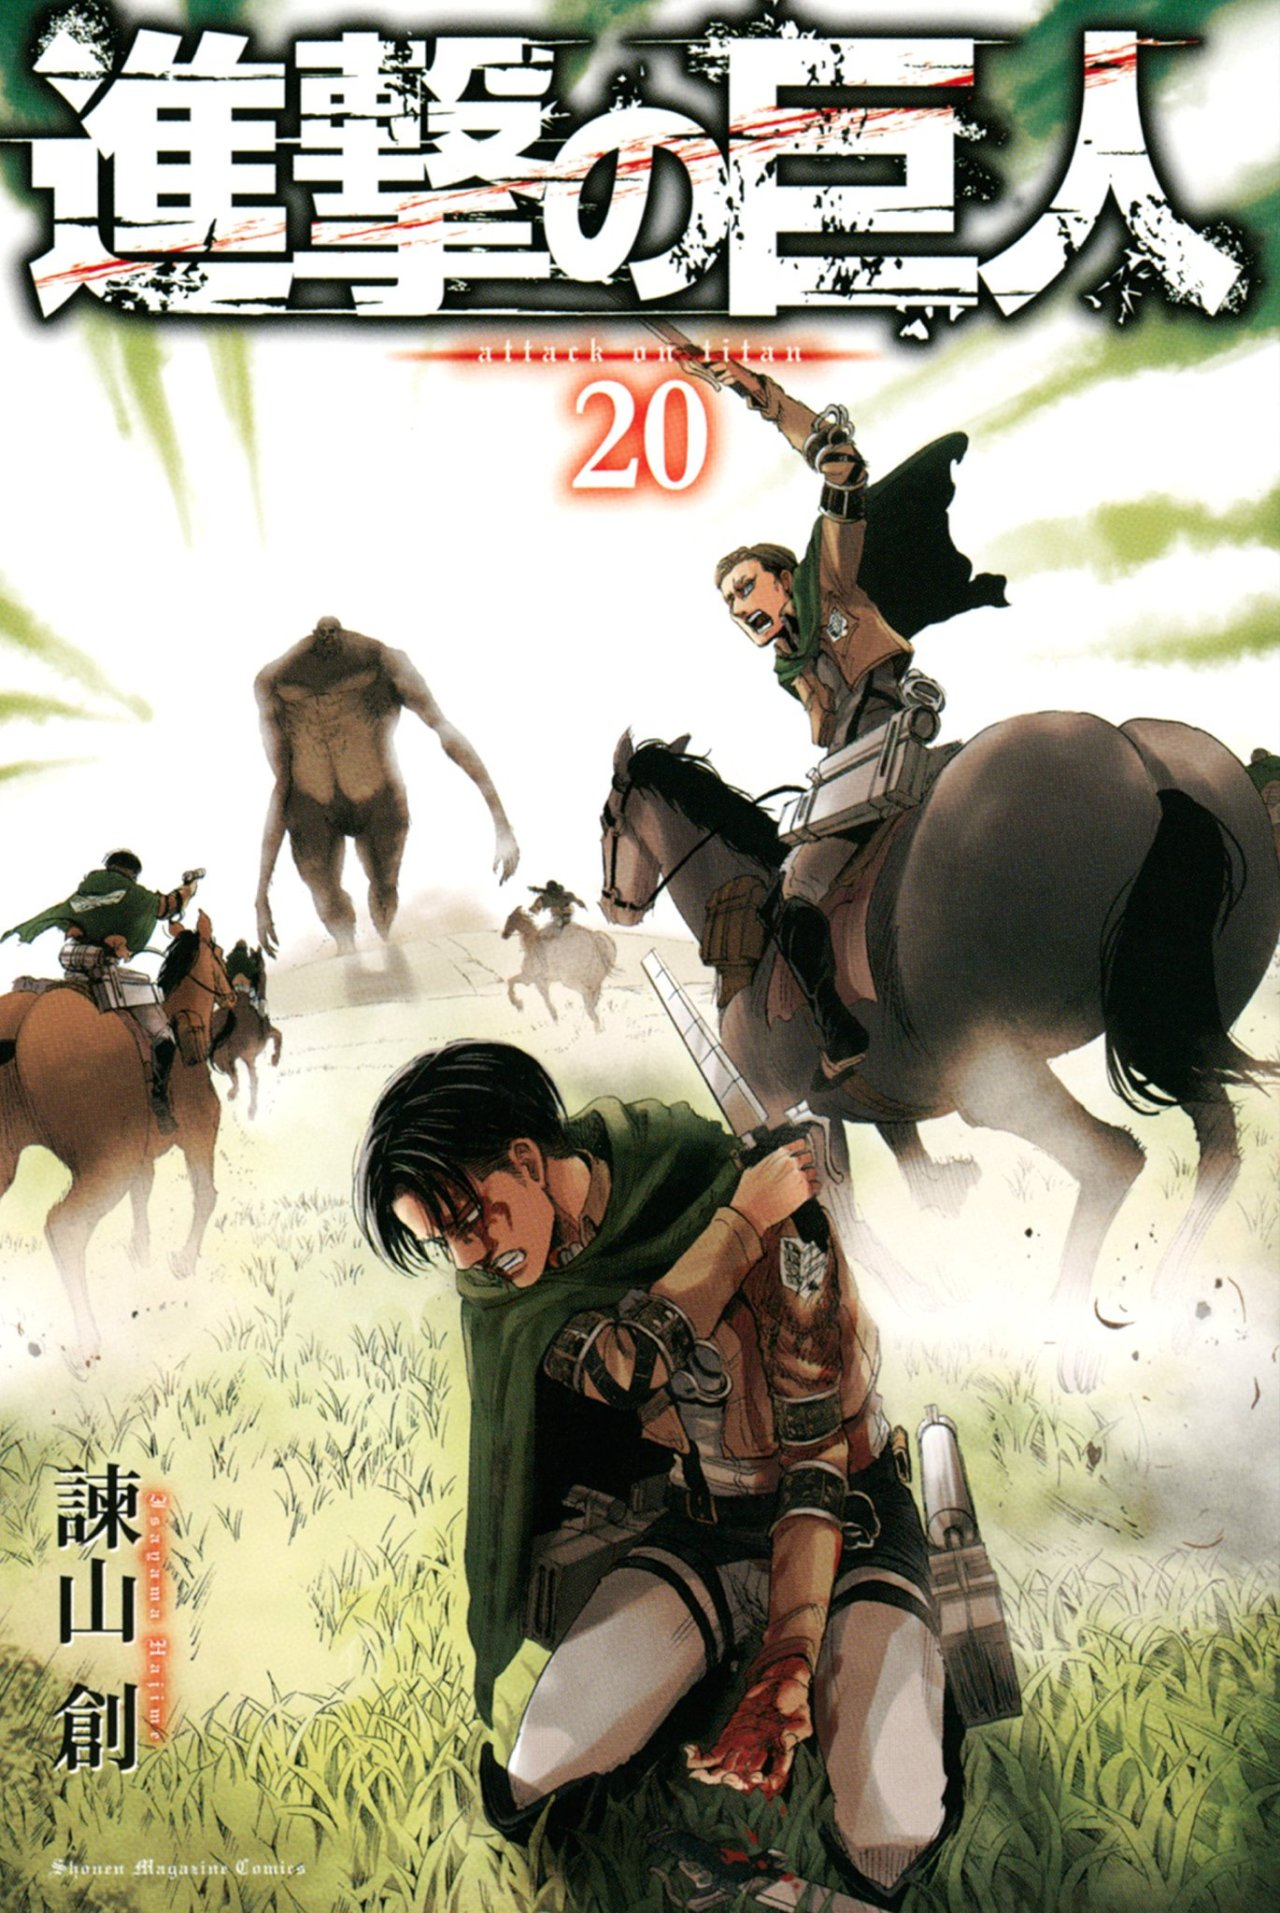 Volume 15 Special Clear Cover Shingeki no Kyojin Attack on Titan